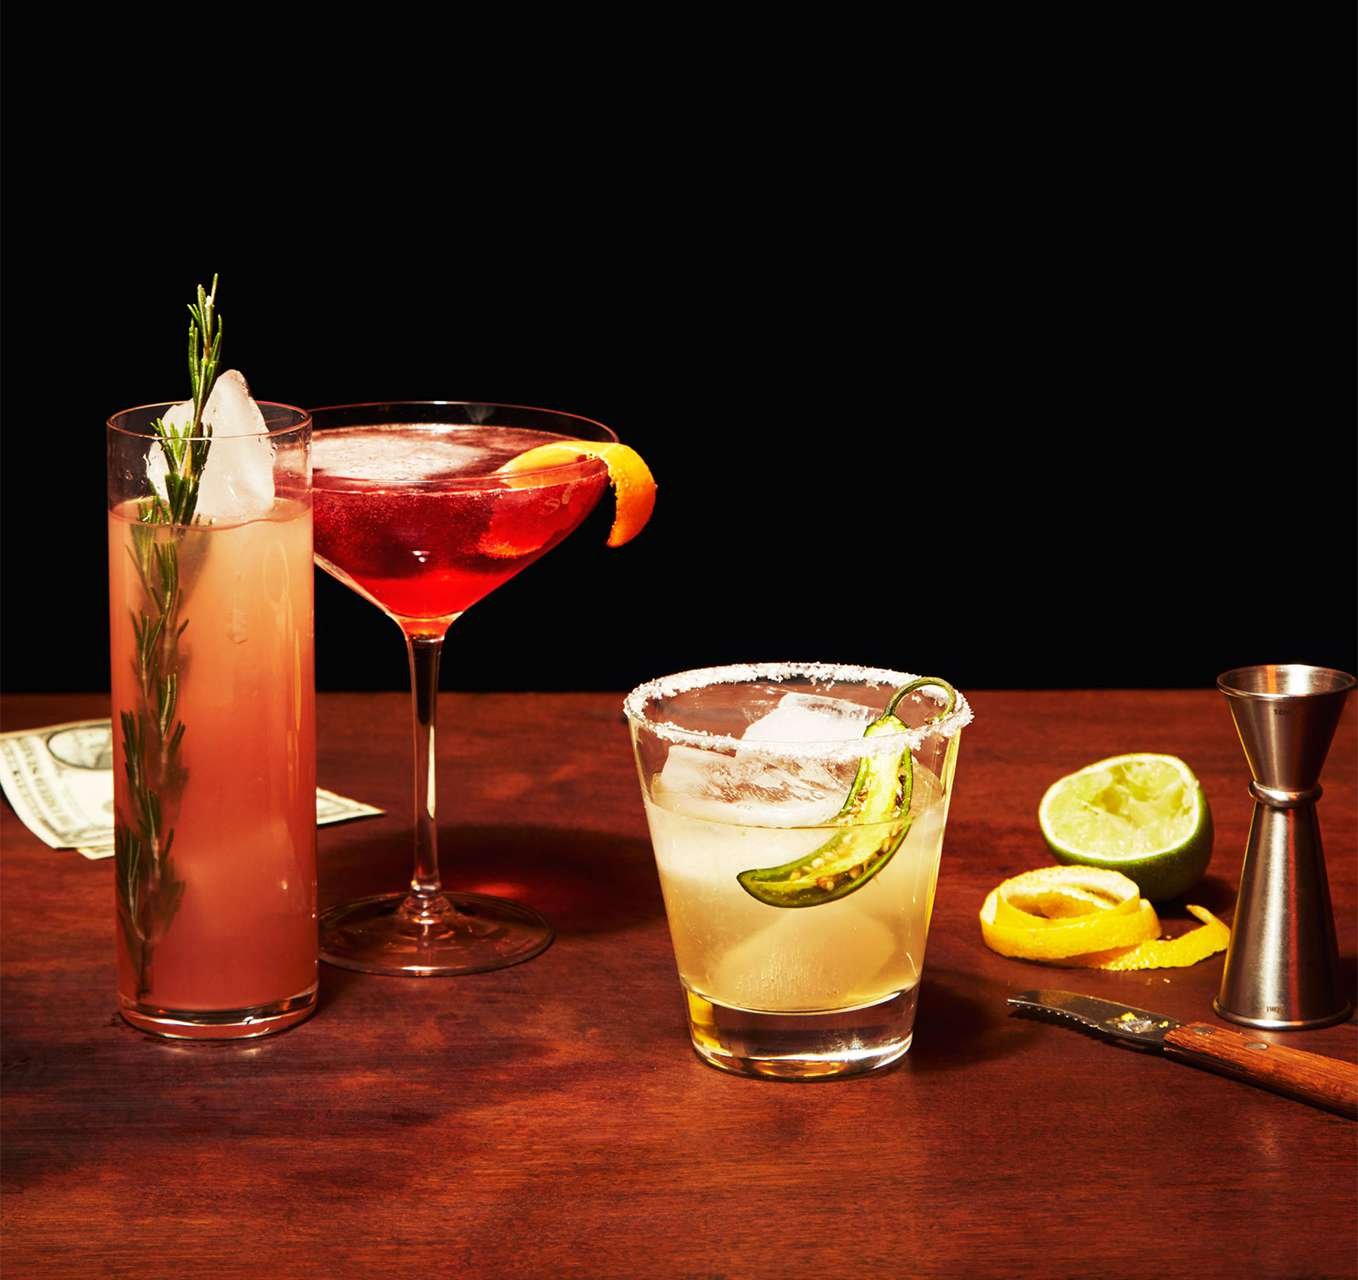 The Foolproof Formula for Creating Your Own Cocktails